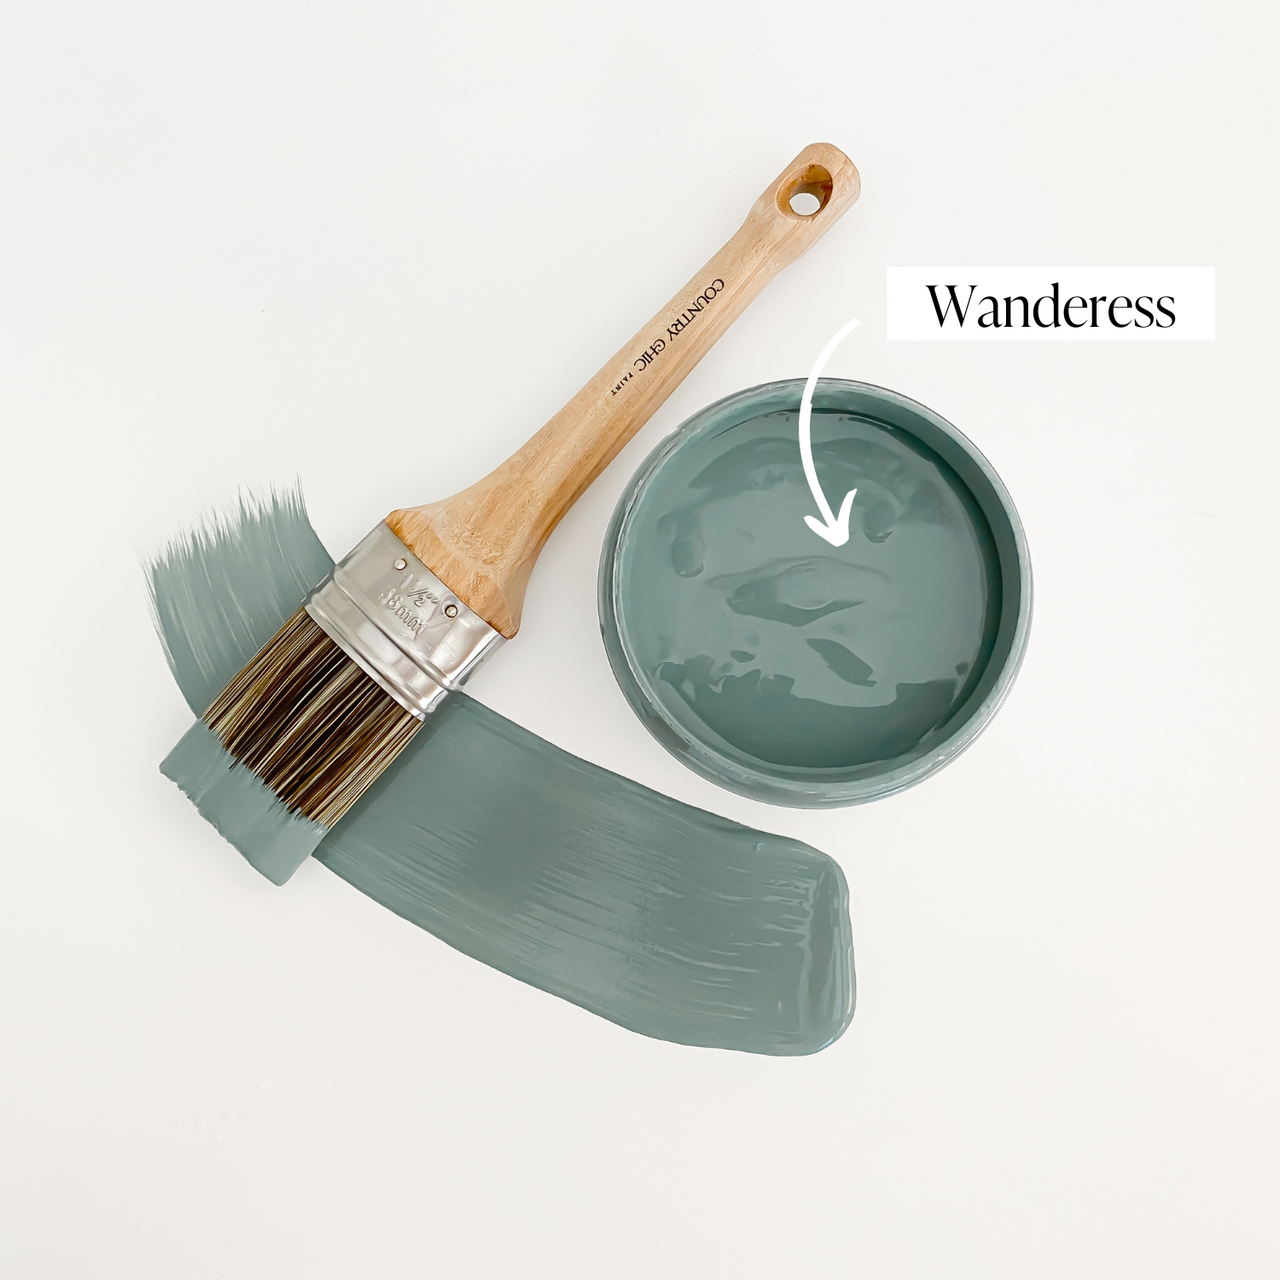 Wanderess - Chalk Style Paint for Furniture, Home Decor, DIY, Cabinets,  Crafts - Eco-Friendly All-In-One Paint